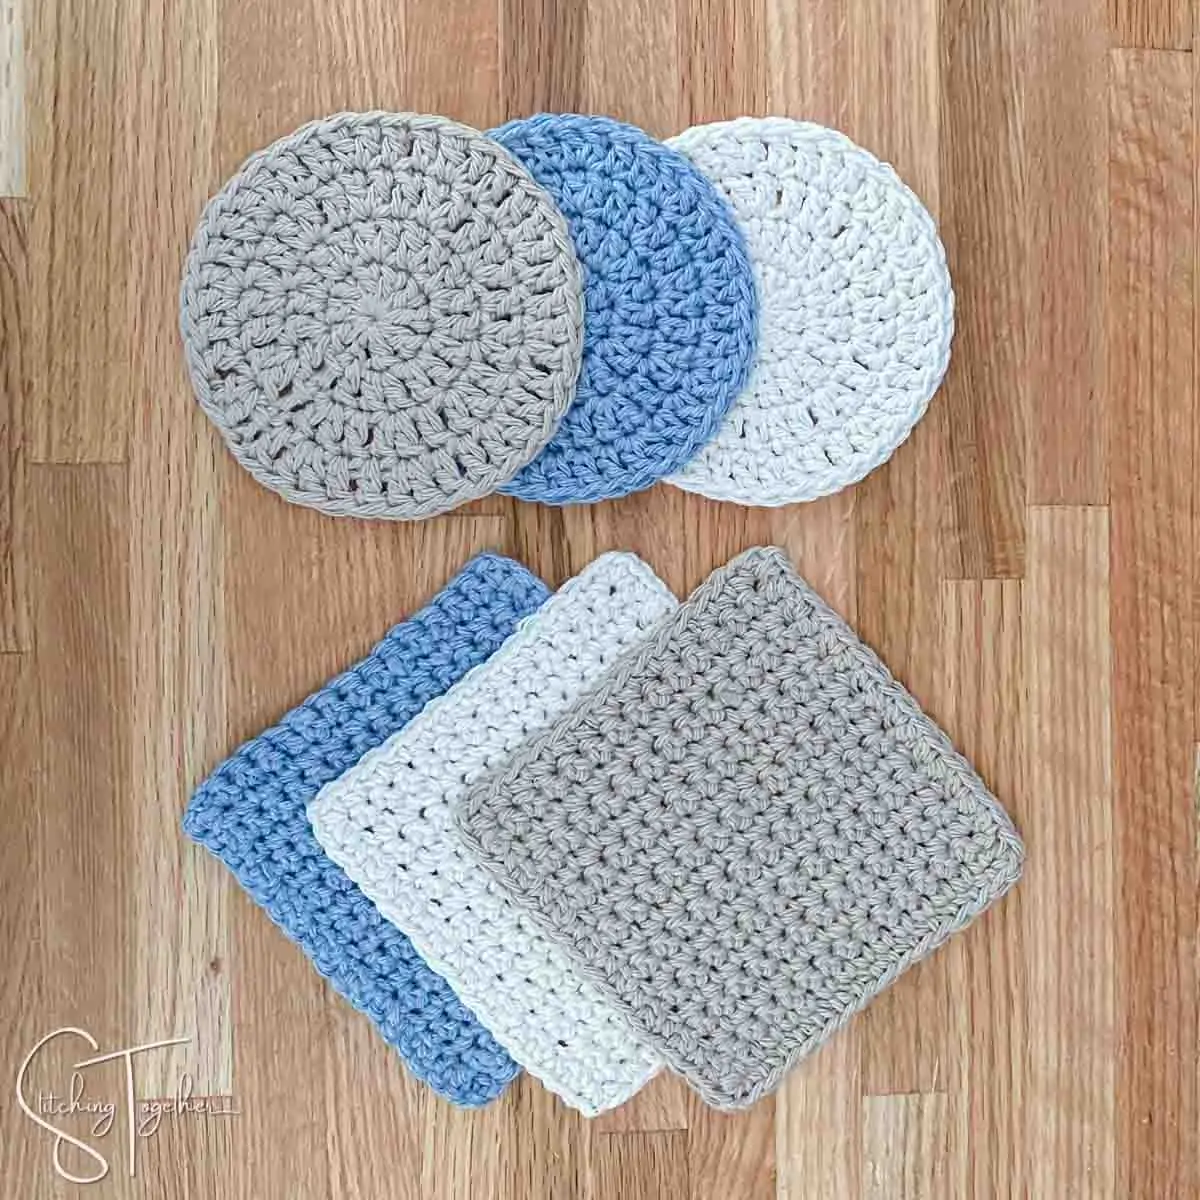 22. How to Crochet a Coaster